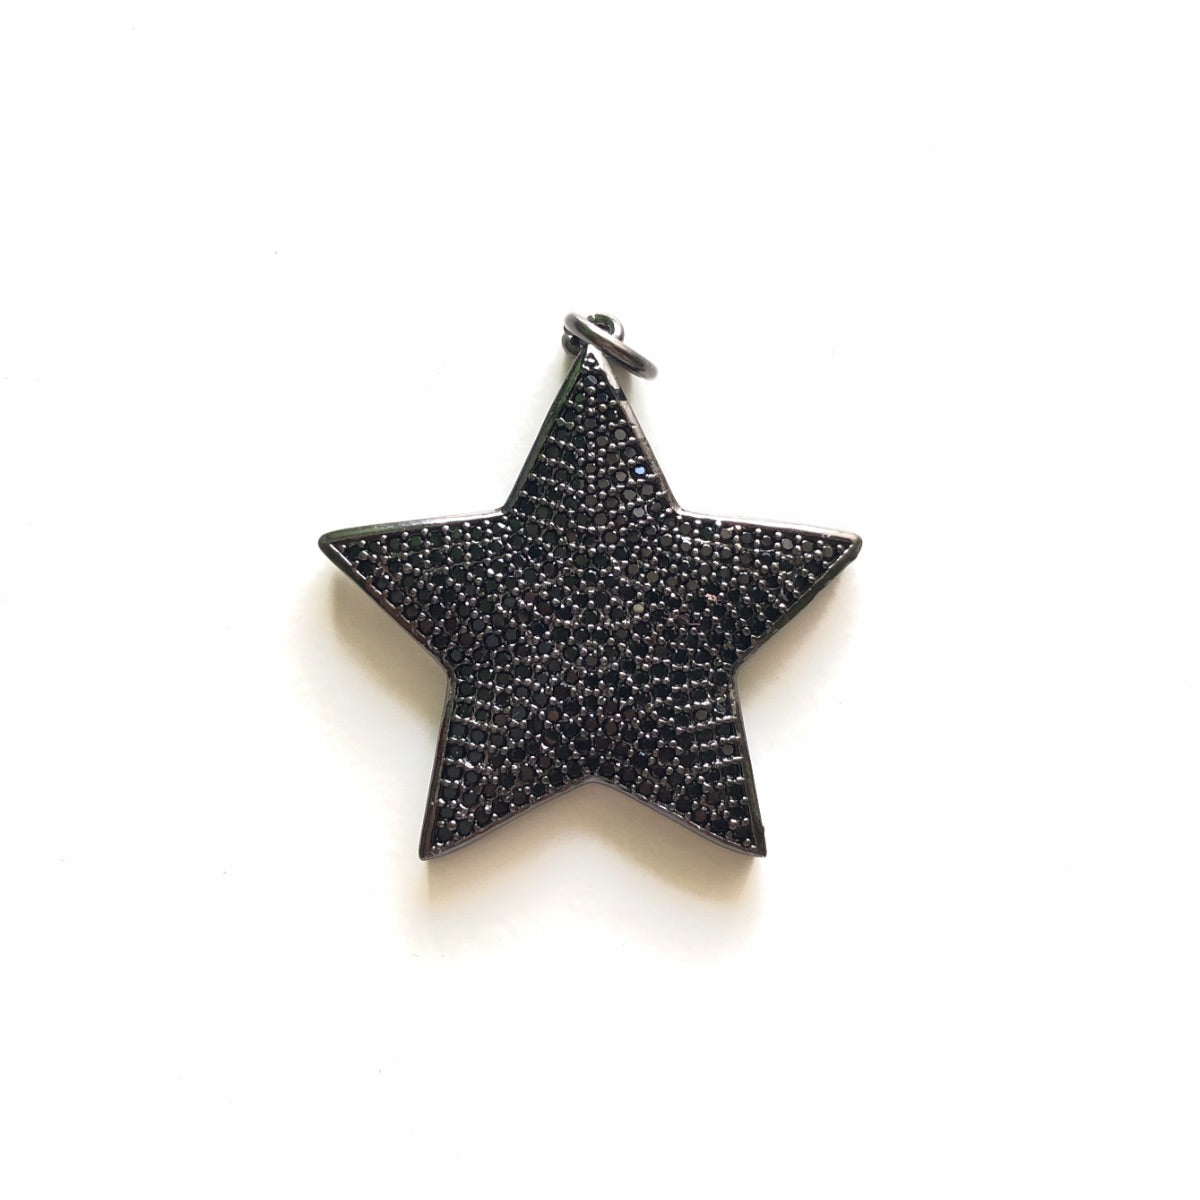 5-10pcs/lot 32*31mm CZ Paved Large Star Charms Black on Black CZ Paved Charms Large Sizes Sun Moon Stars Charms Beads Beyond